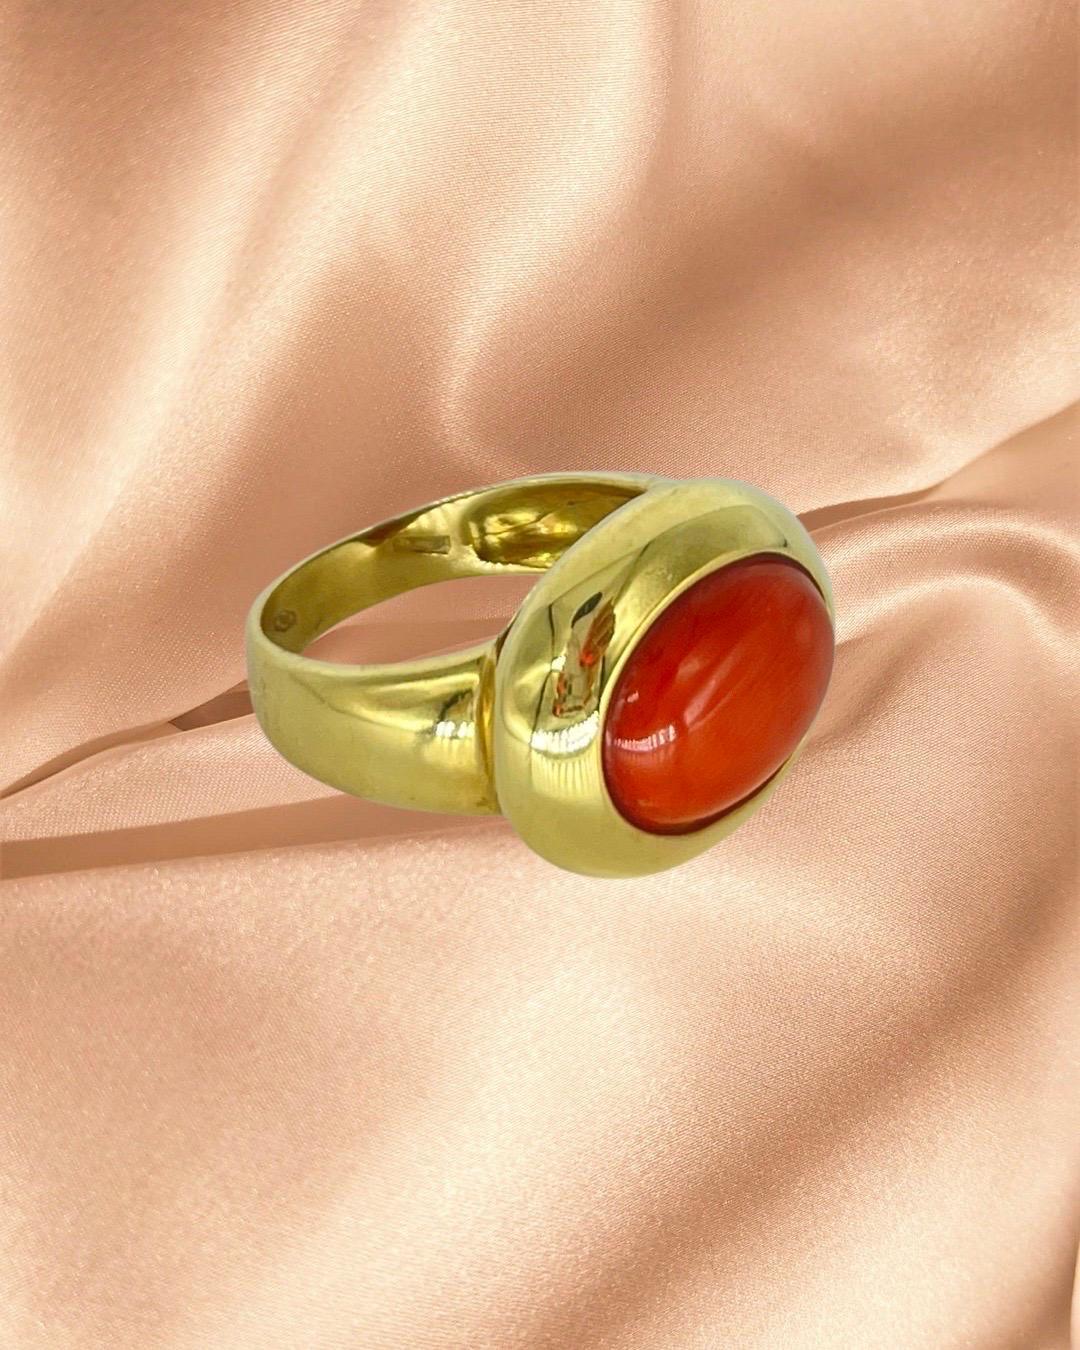 Vintage Red Coral Stone Earrings, Ring and Pendant Set 18k Gold. This is a very beautiful and bold set handcrafted to perfection in 18 karat gold. The total weight is 24.3 grams with measurements as follows:
Earrings measure 18mm X 14mm with the